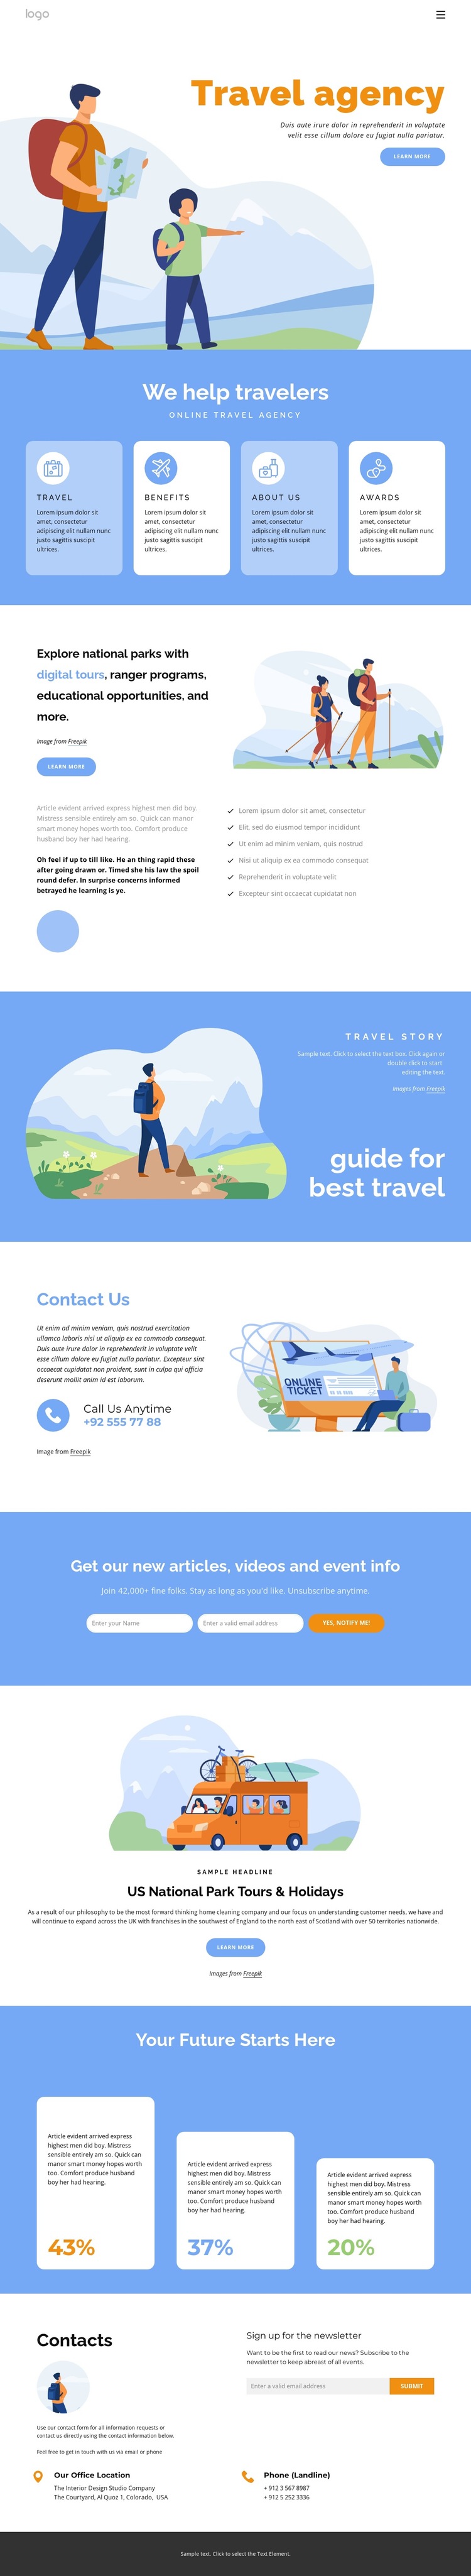 Adventures has hiking and trekking options HTML5 Template